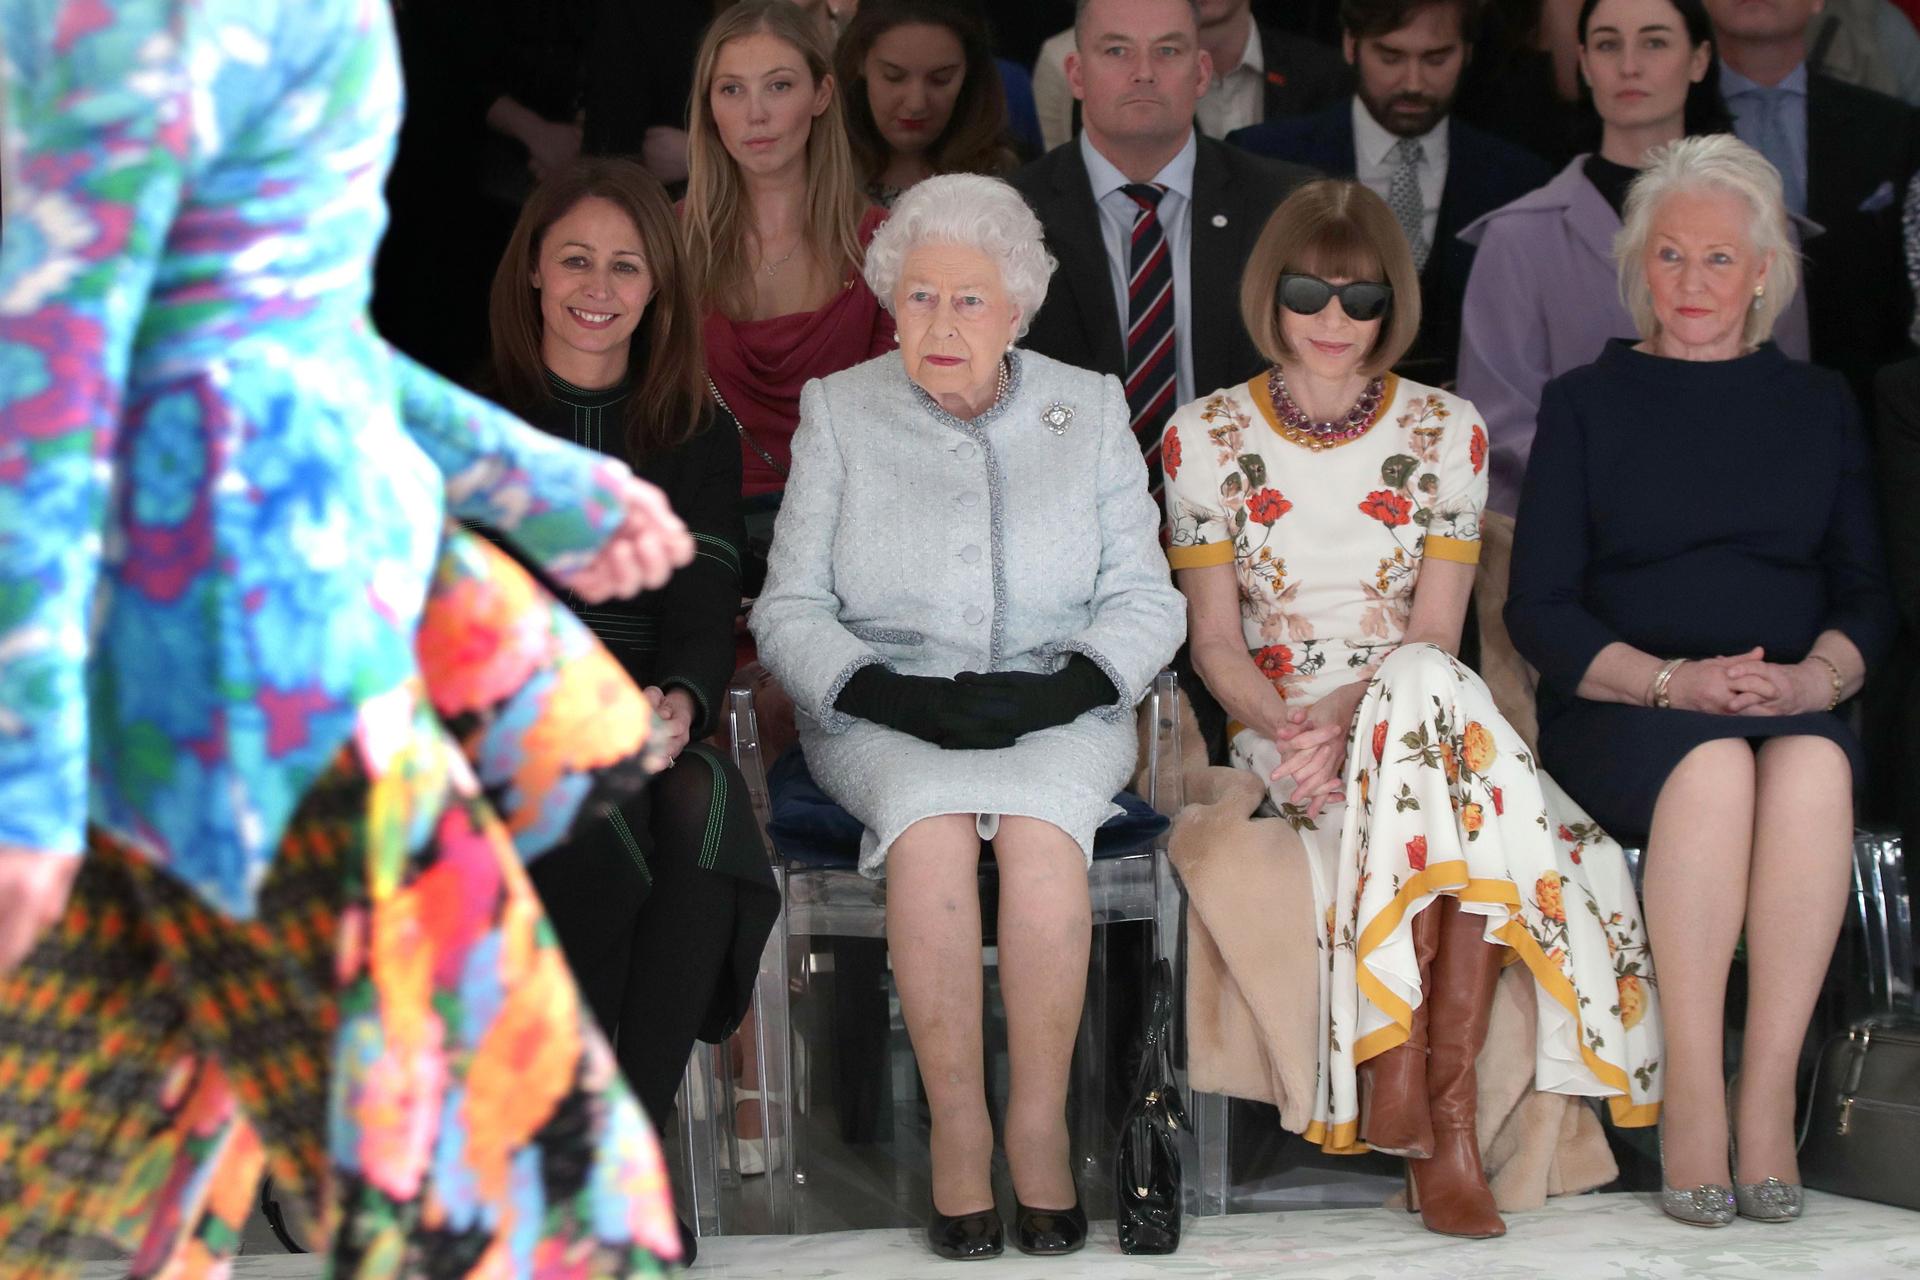 The Queen attending this LFW Runway Show is Awesome!